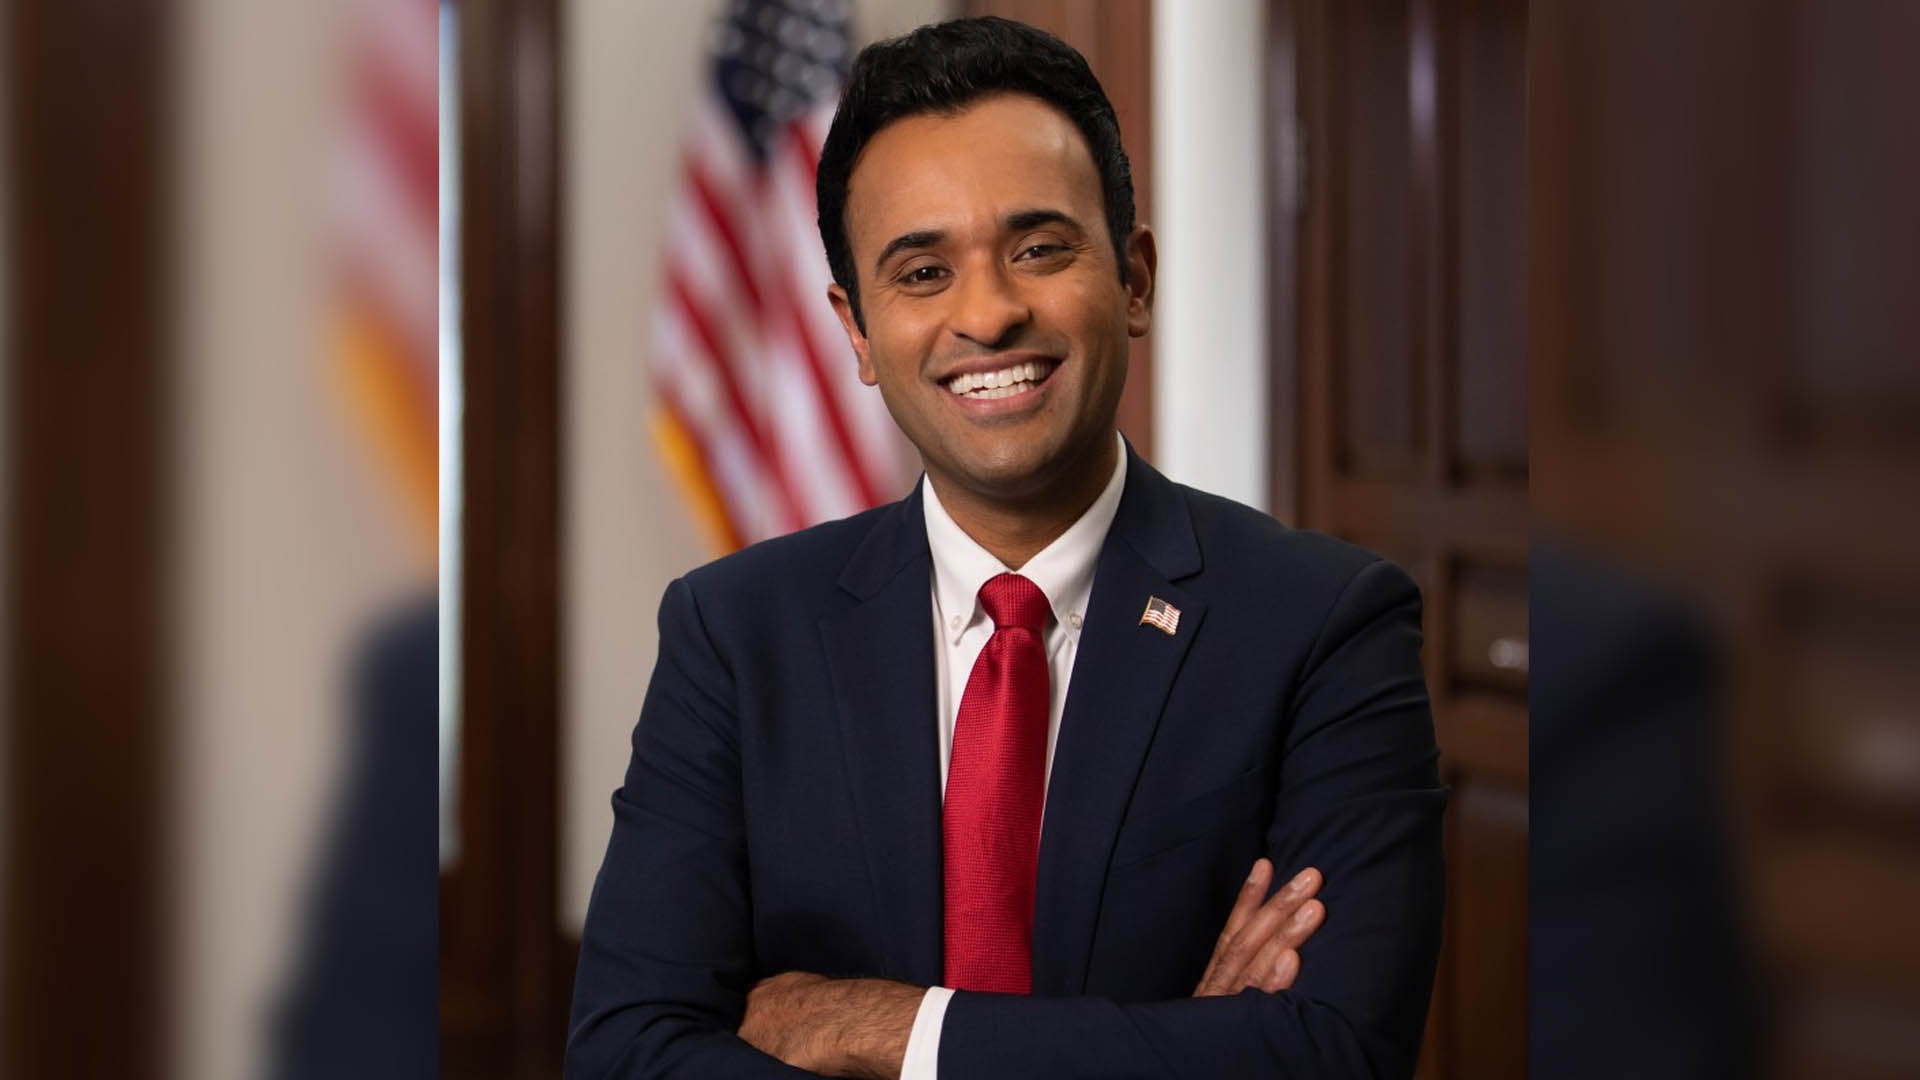 Vivek Ramaswamy announces he's suspending his presidential bid after a disappointing finish in Iowa